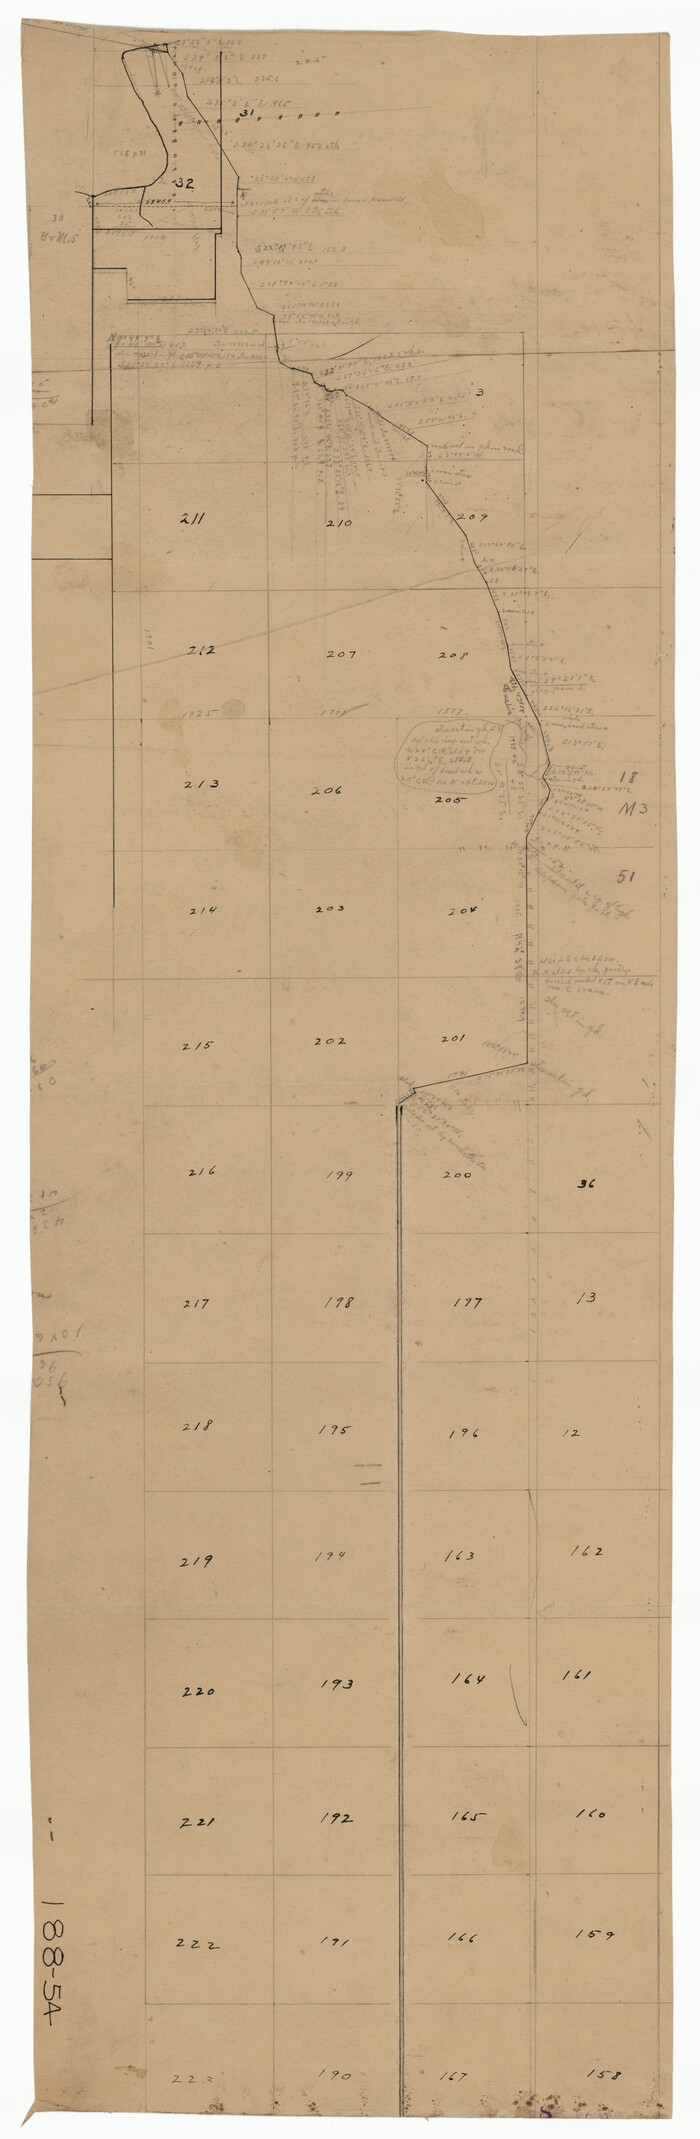 91708, [Sketch showing Block M-3], Twichell Survey Records